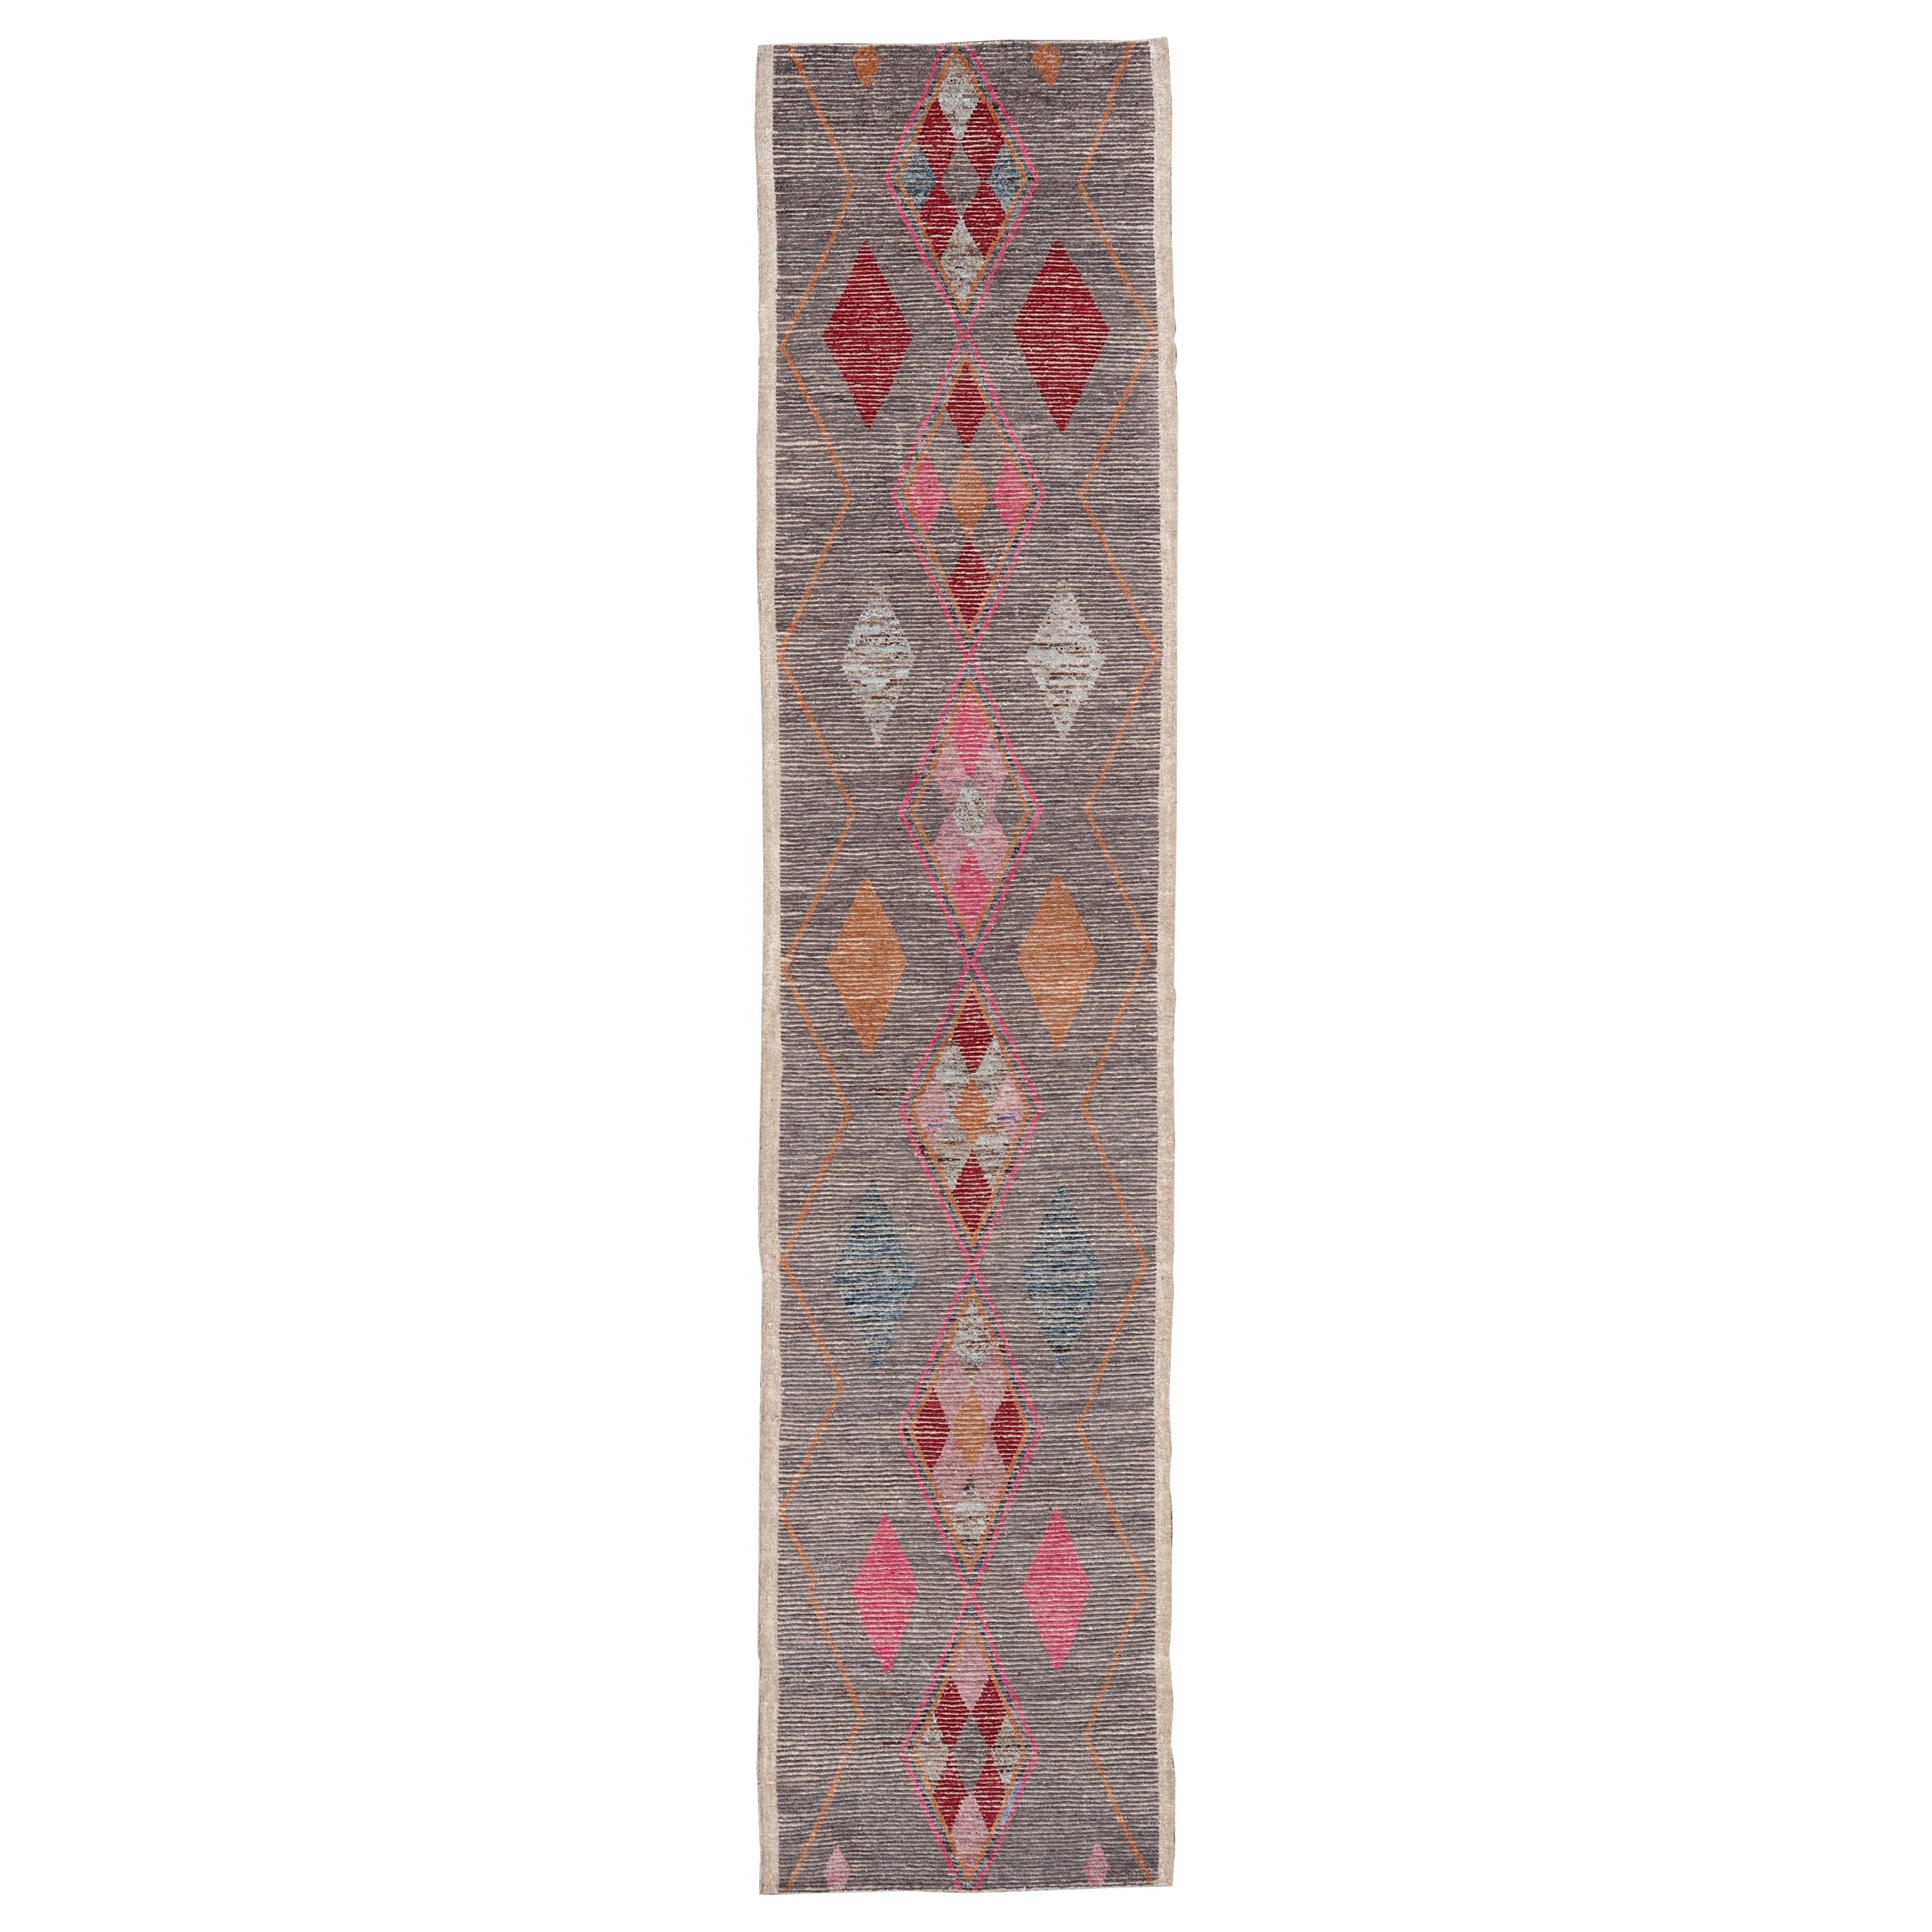 All-Over Modern Tribal Design on a Grey Background with Medallions with Red